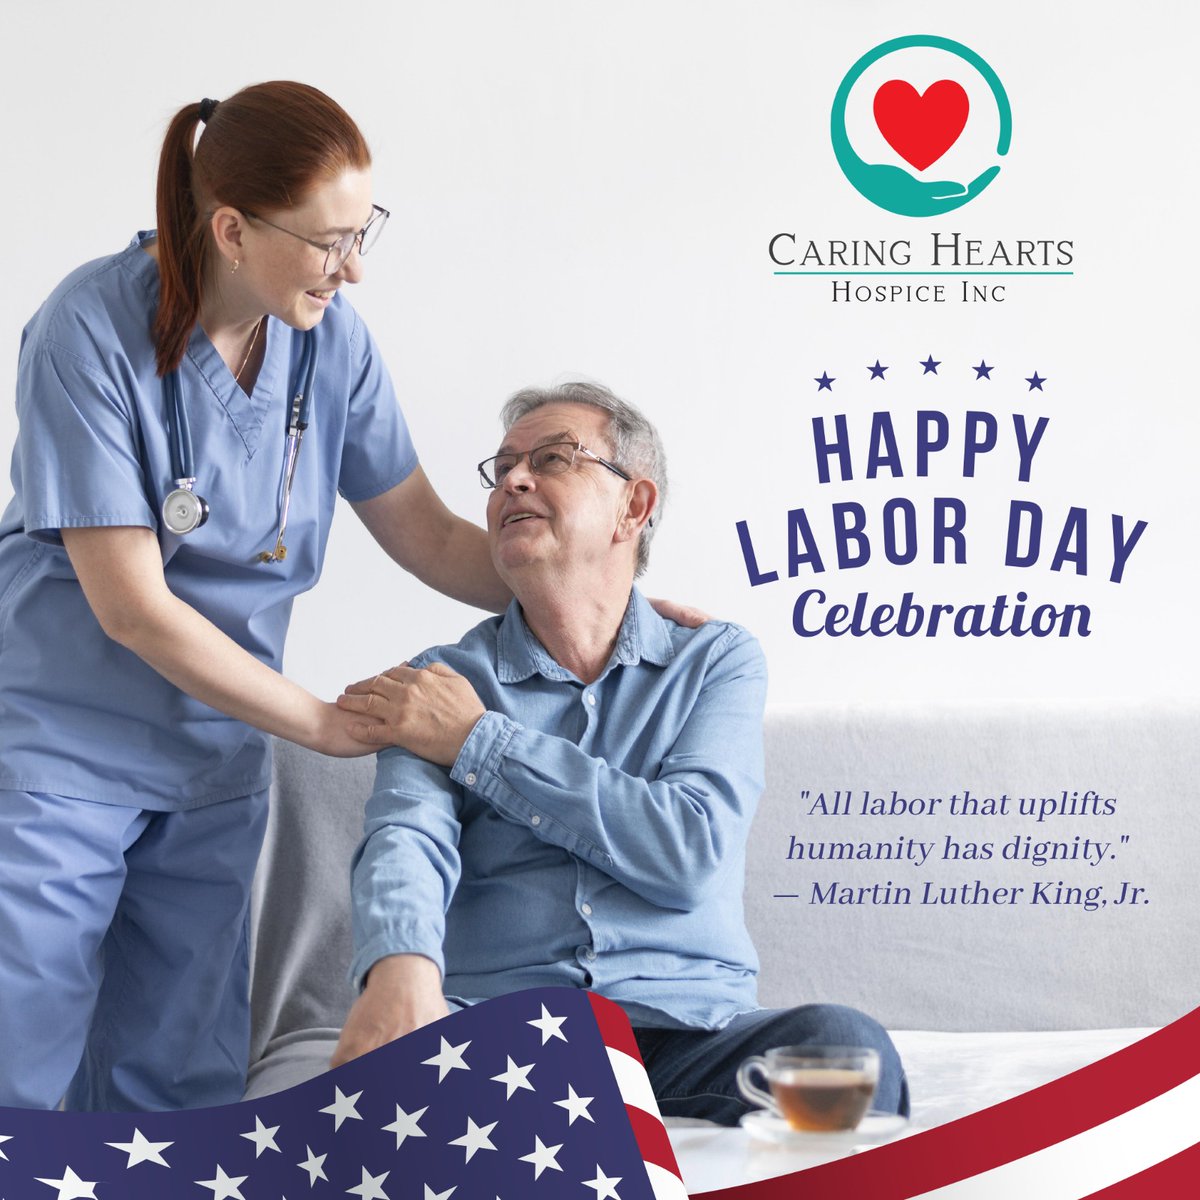 Let's make this Labor Day celebration a beautiful tribute to our hospice heroes, let's celebrate the unsung heroes of hospice care.
#HospiceHeroes #LaborDayCelebration